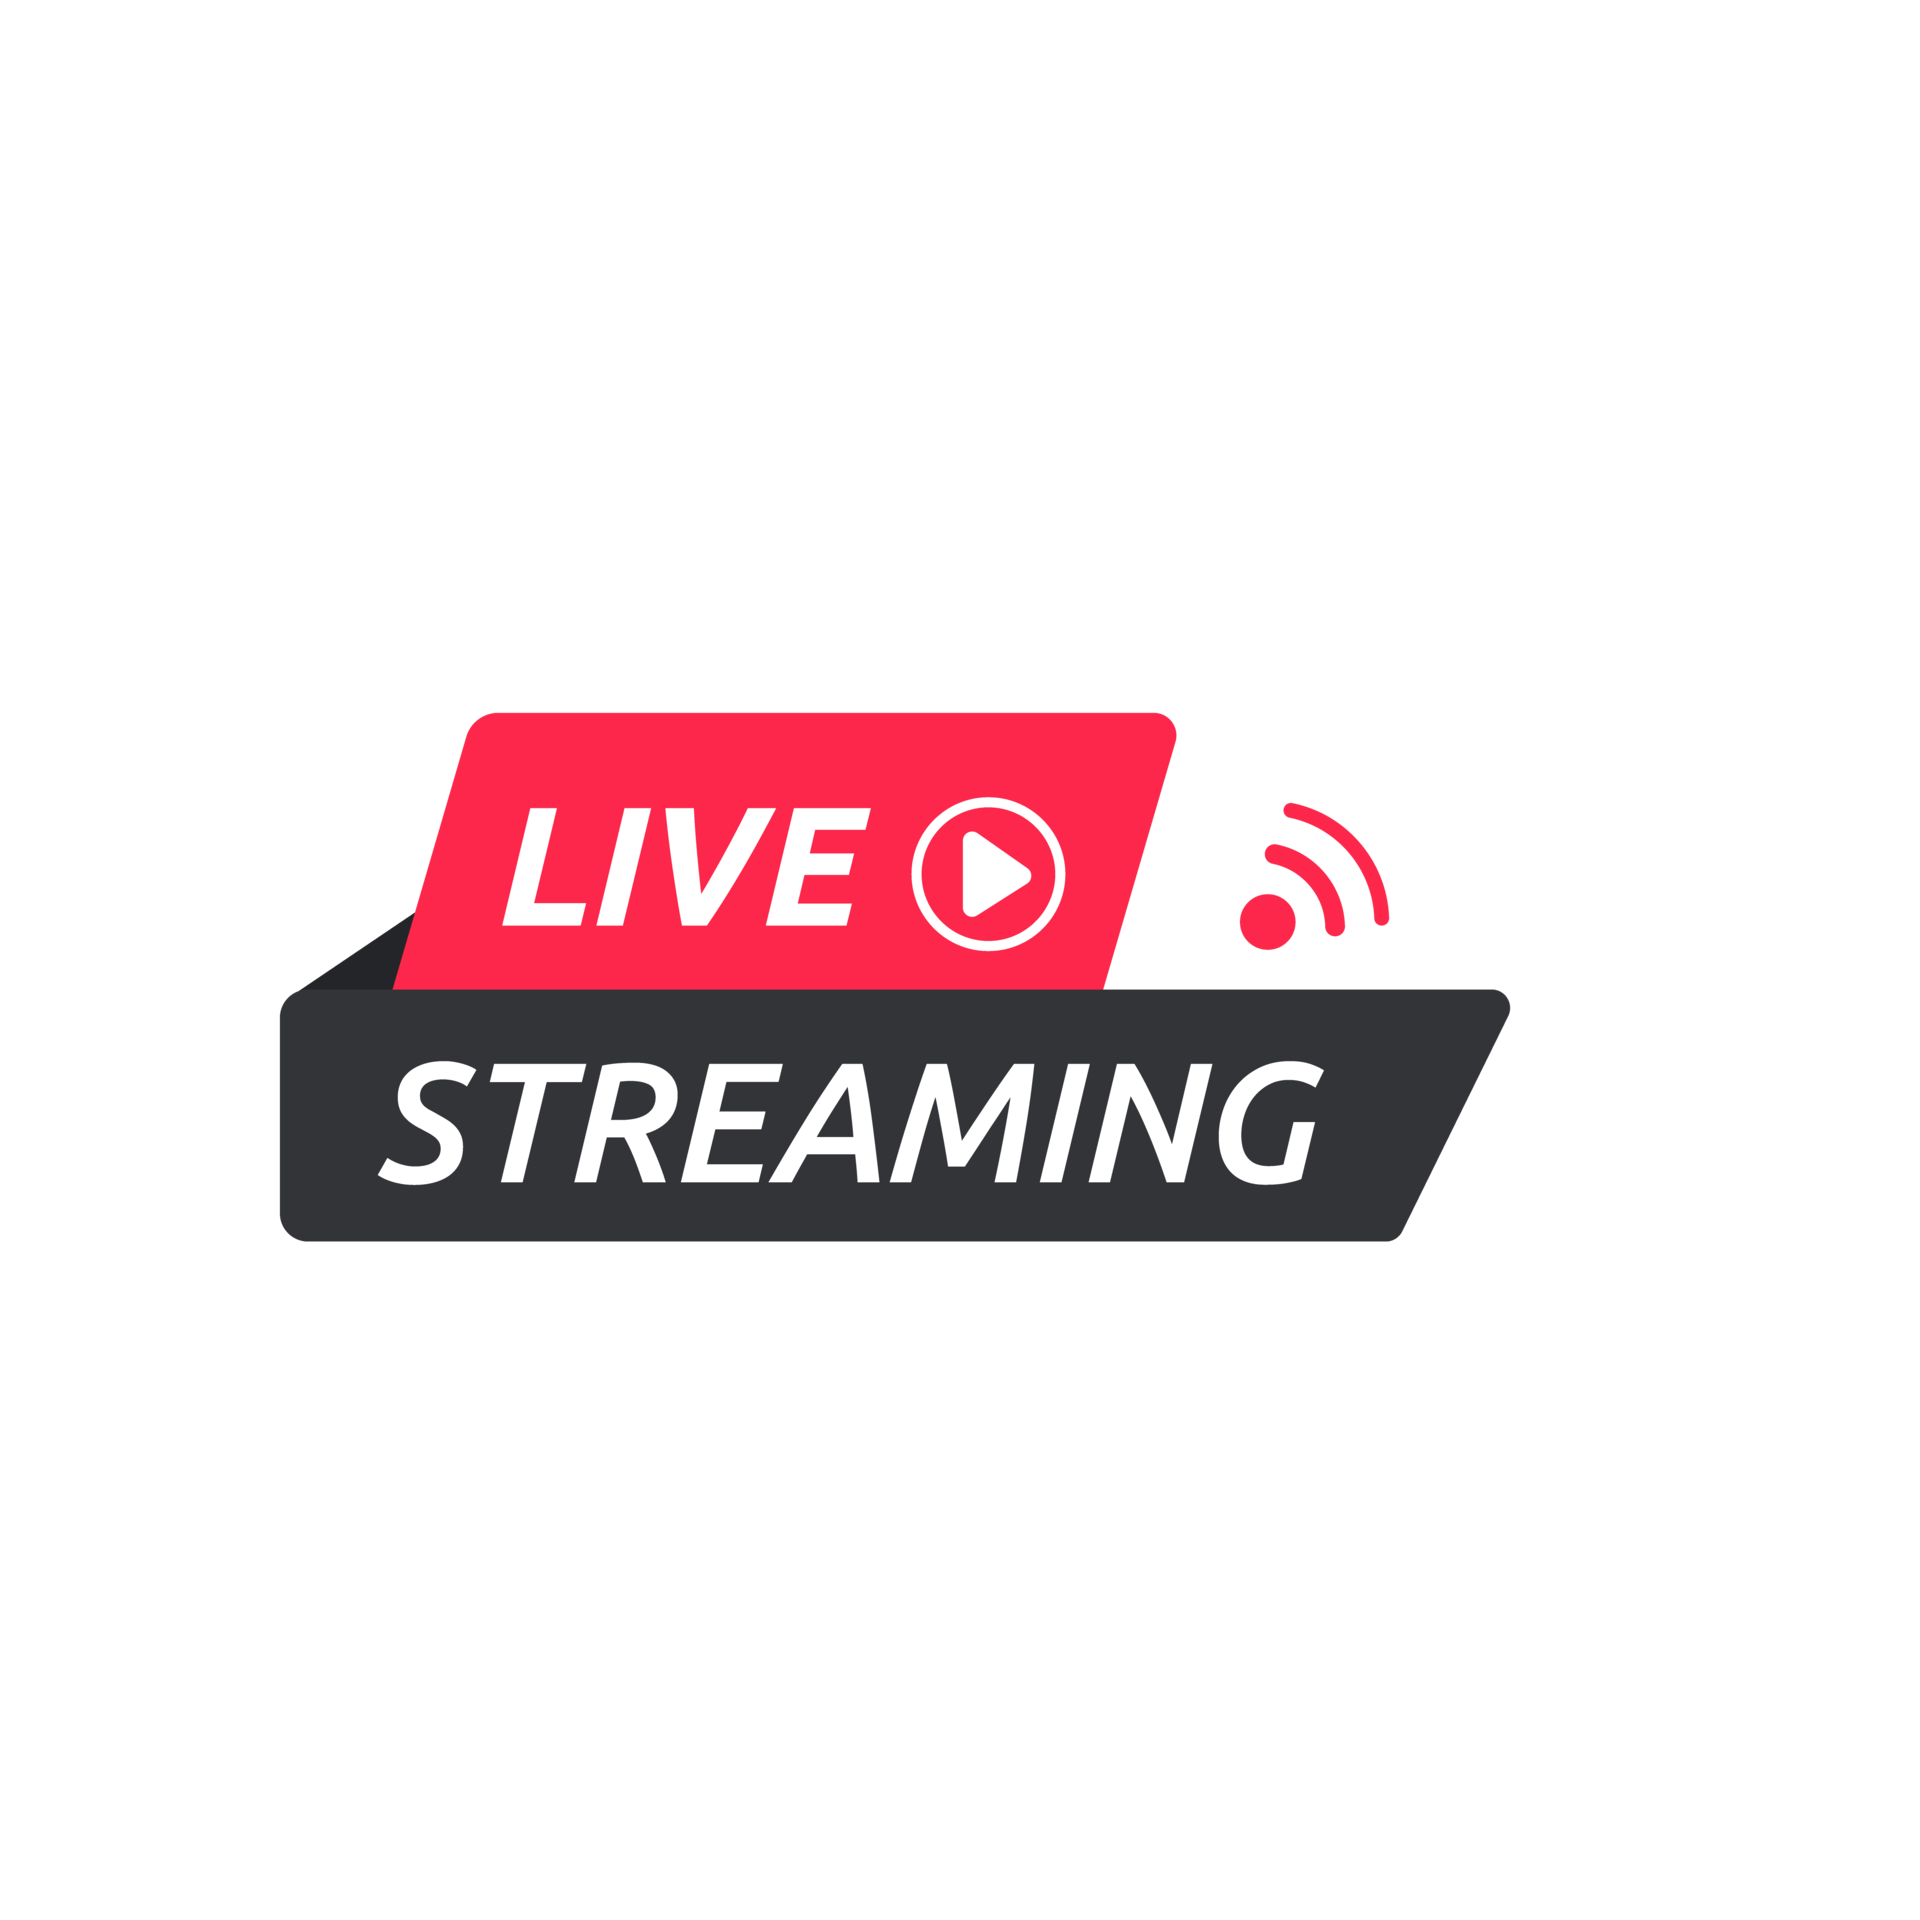 Live streaming symbol set Online broadcast icon The concept of live streaming for selling on social media